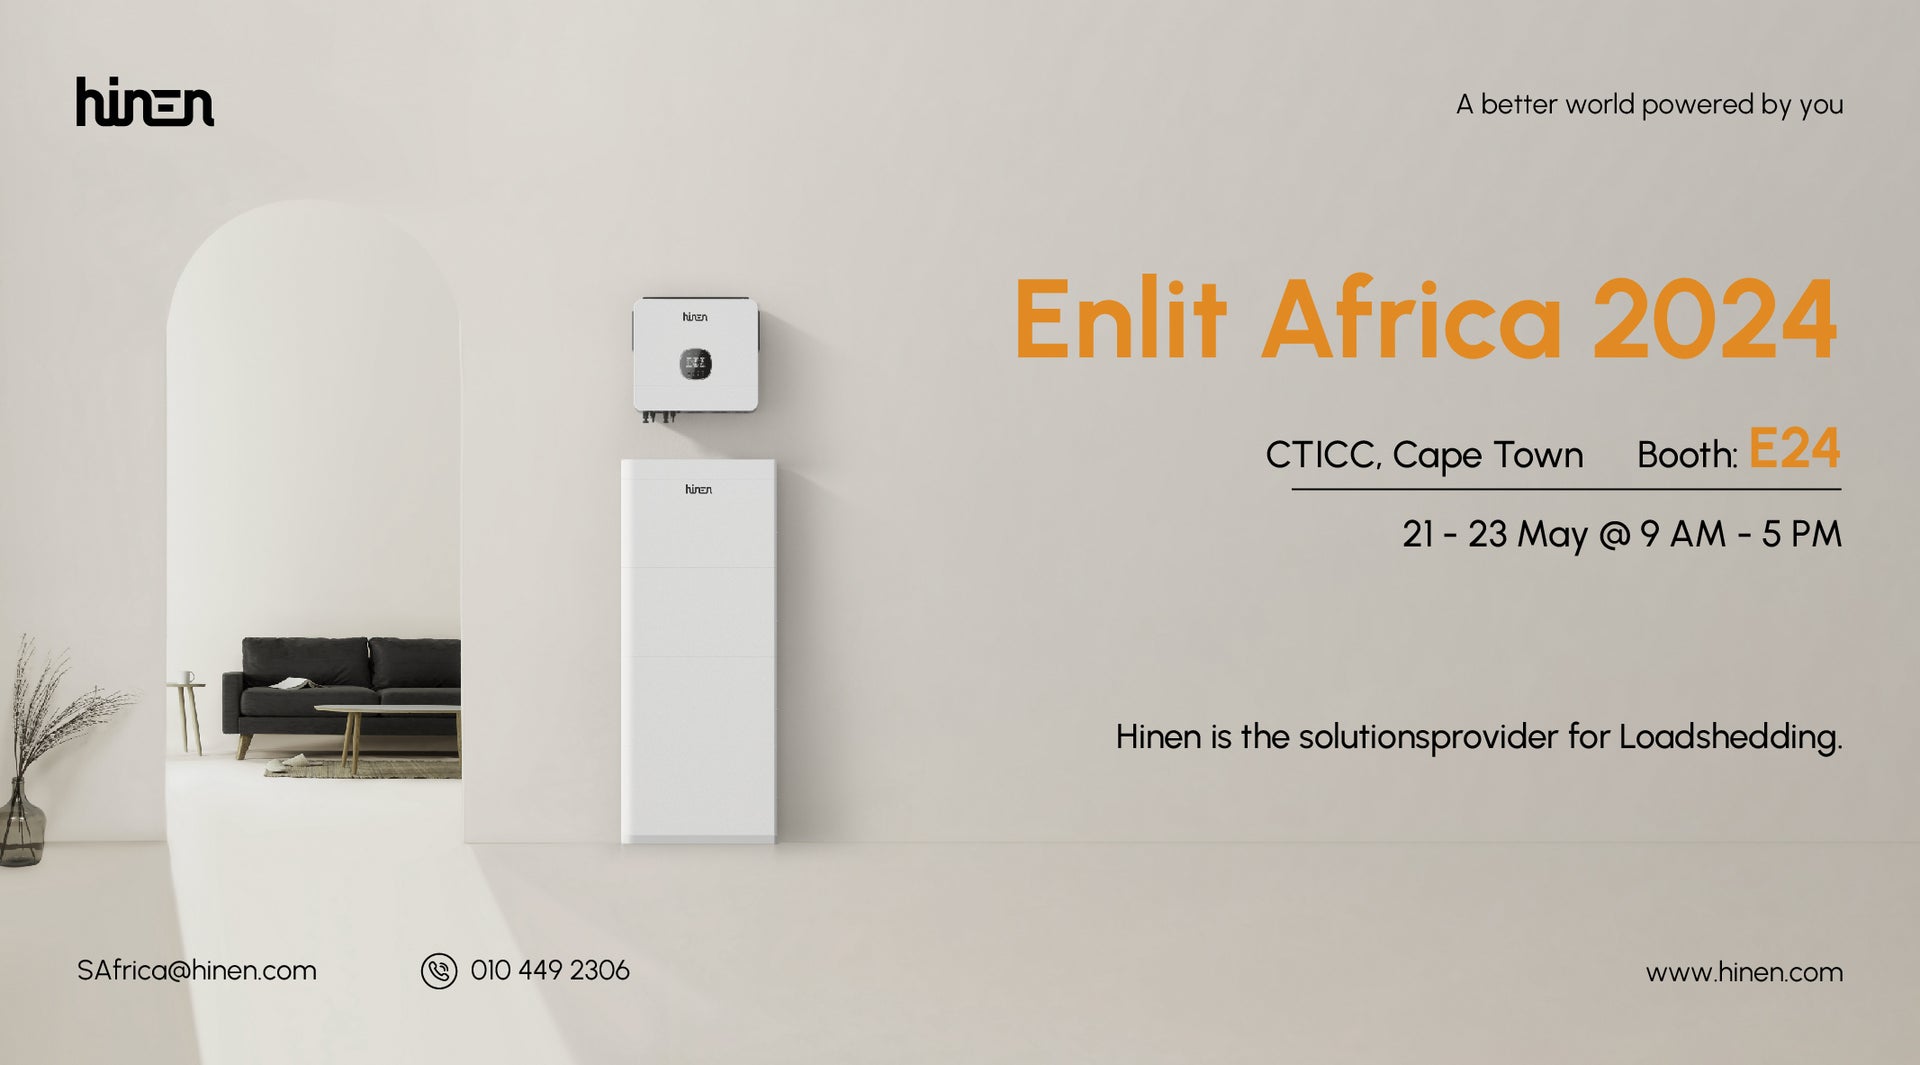 Hinen Exhibits at Enlit Africa 2024, Supporting South Africa's Electricity Transition Journey